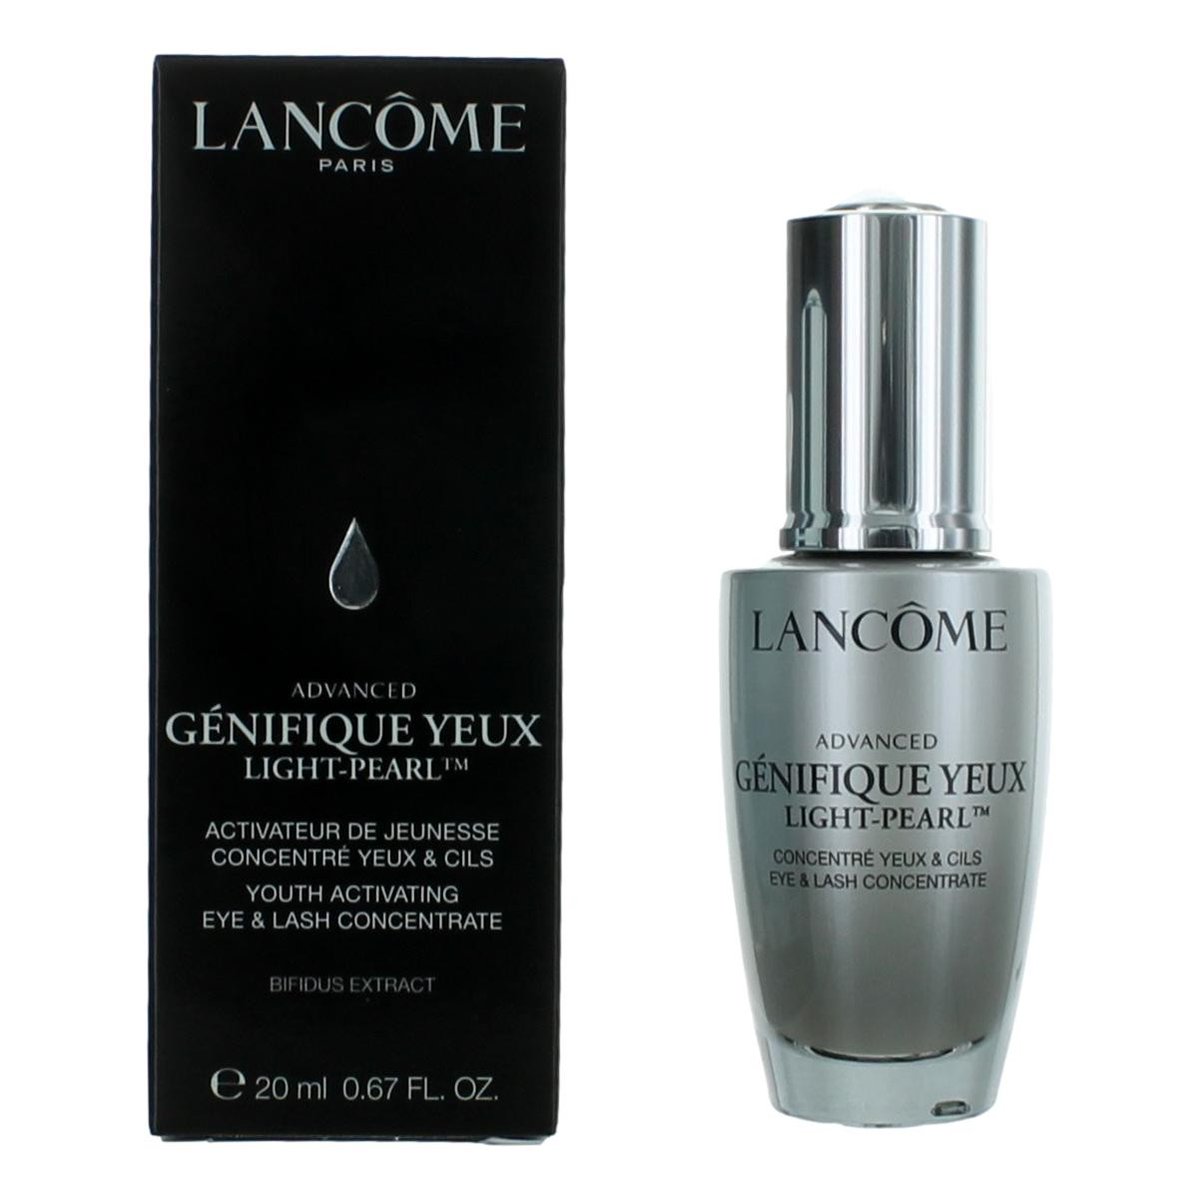 Have you seen our Lancome by Lancome, .67 oz Advanced Genifique Eye Light-Pearl?
Come check it out!
exbeautyco.com/products/view/…

#eyecream #antiaging #serum #darkcircles #eyecare  #skincareproducts #skincaretips #eyeserum  #moisturizer #wrinkles #eyetreatment #puffyeyes #eyebags